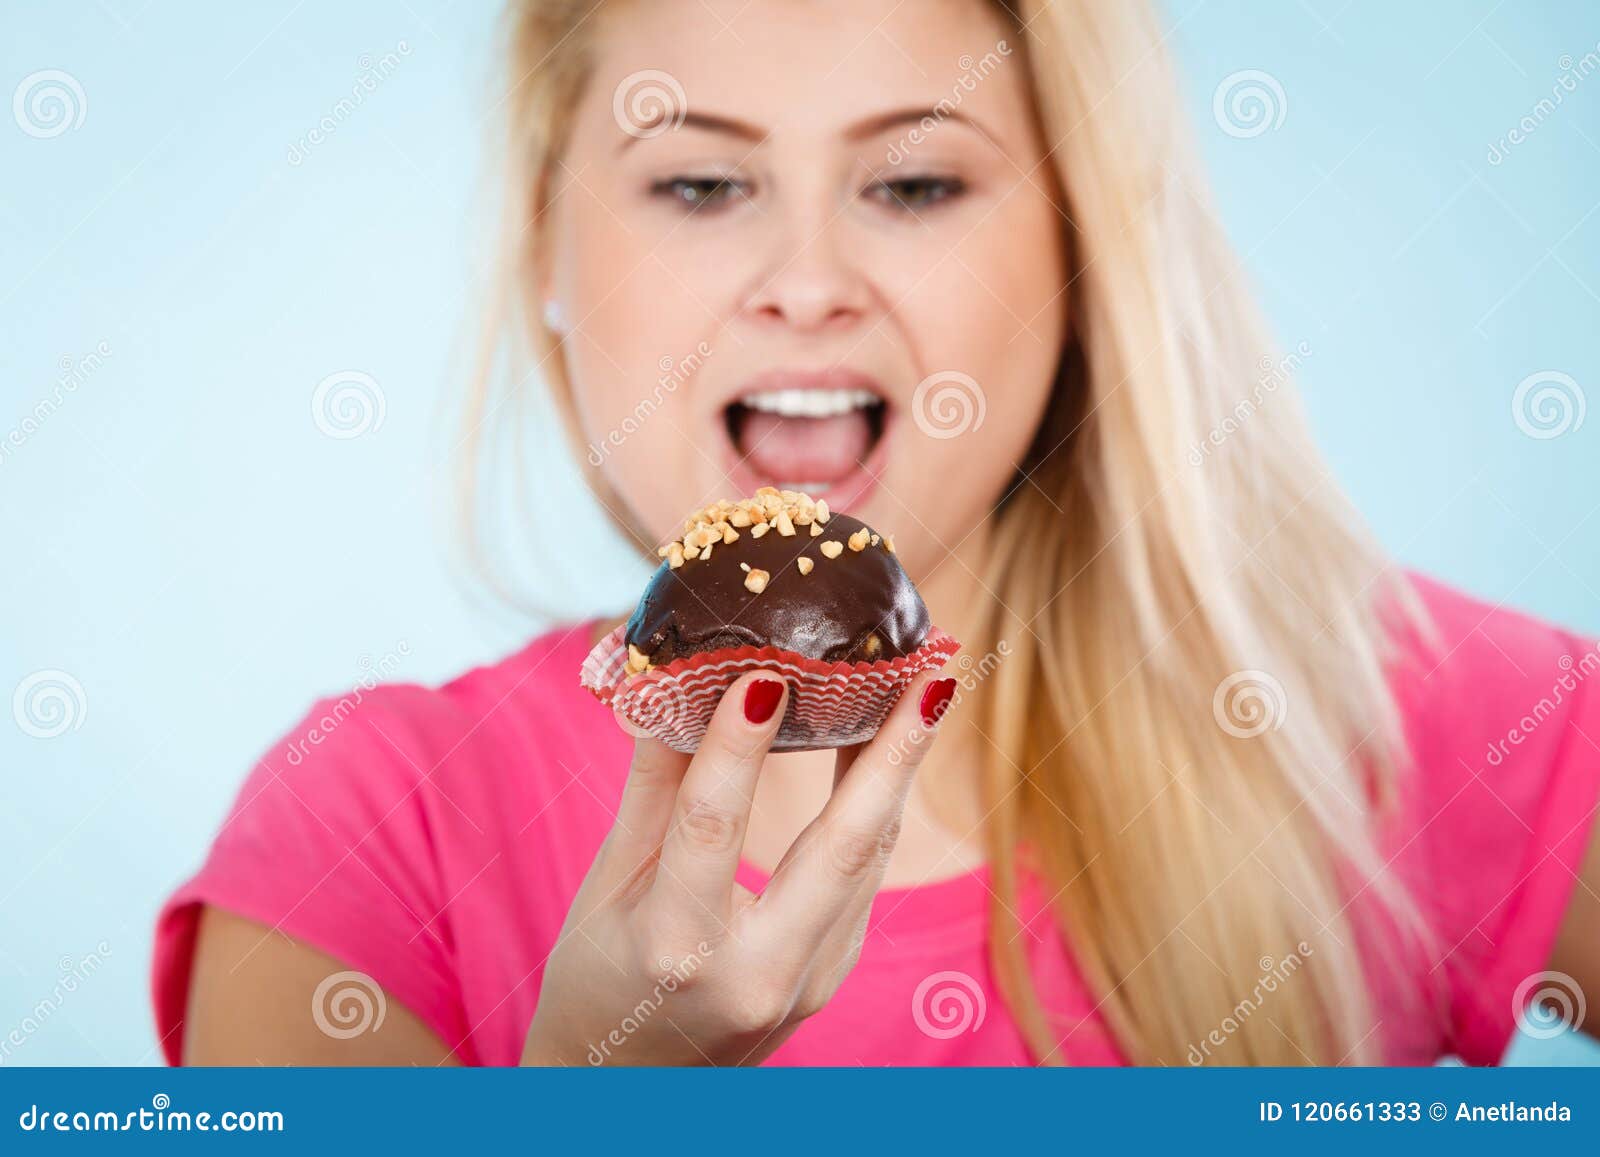 cupcake Mouth by wide open